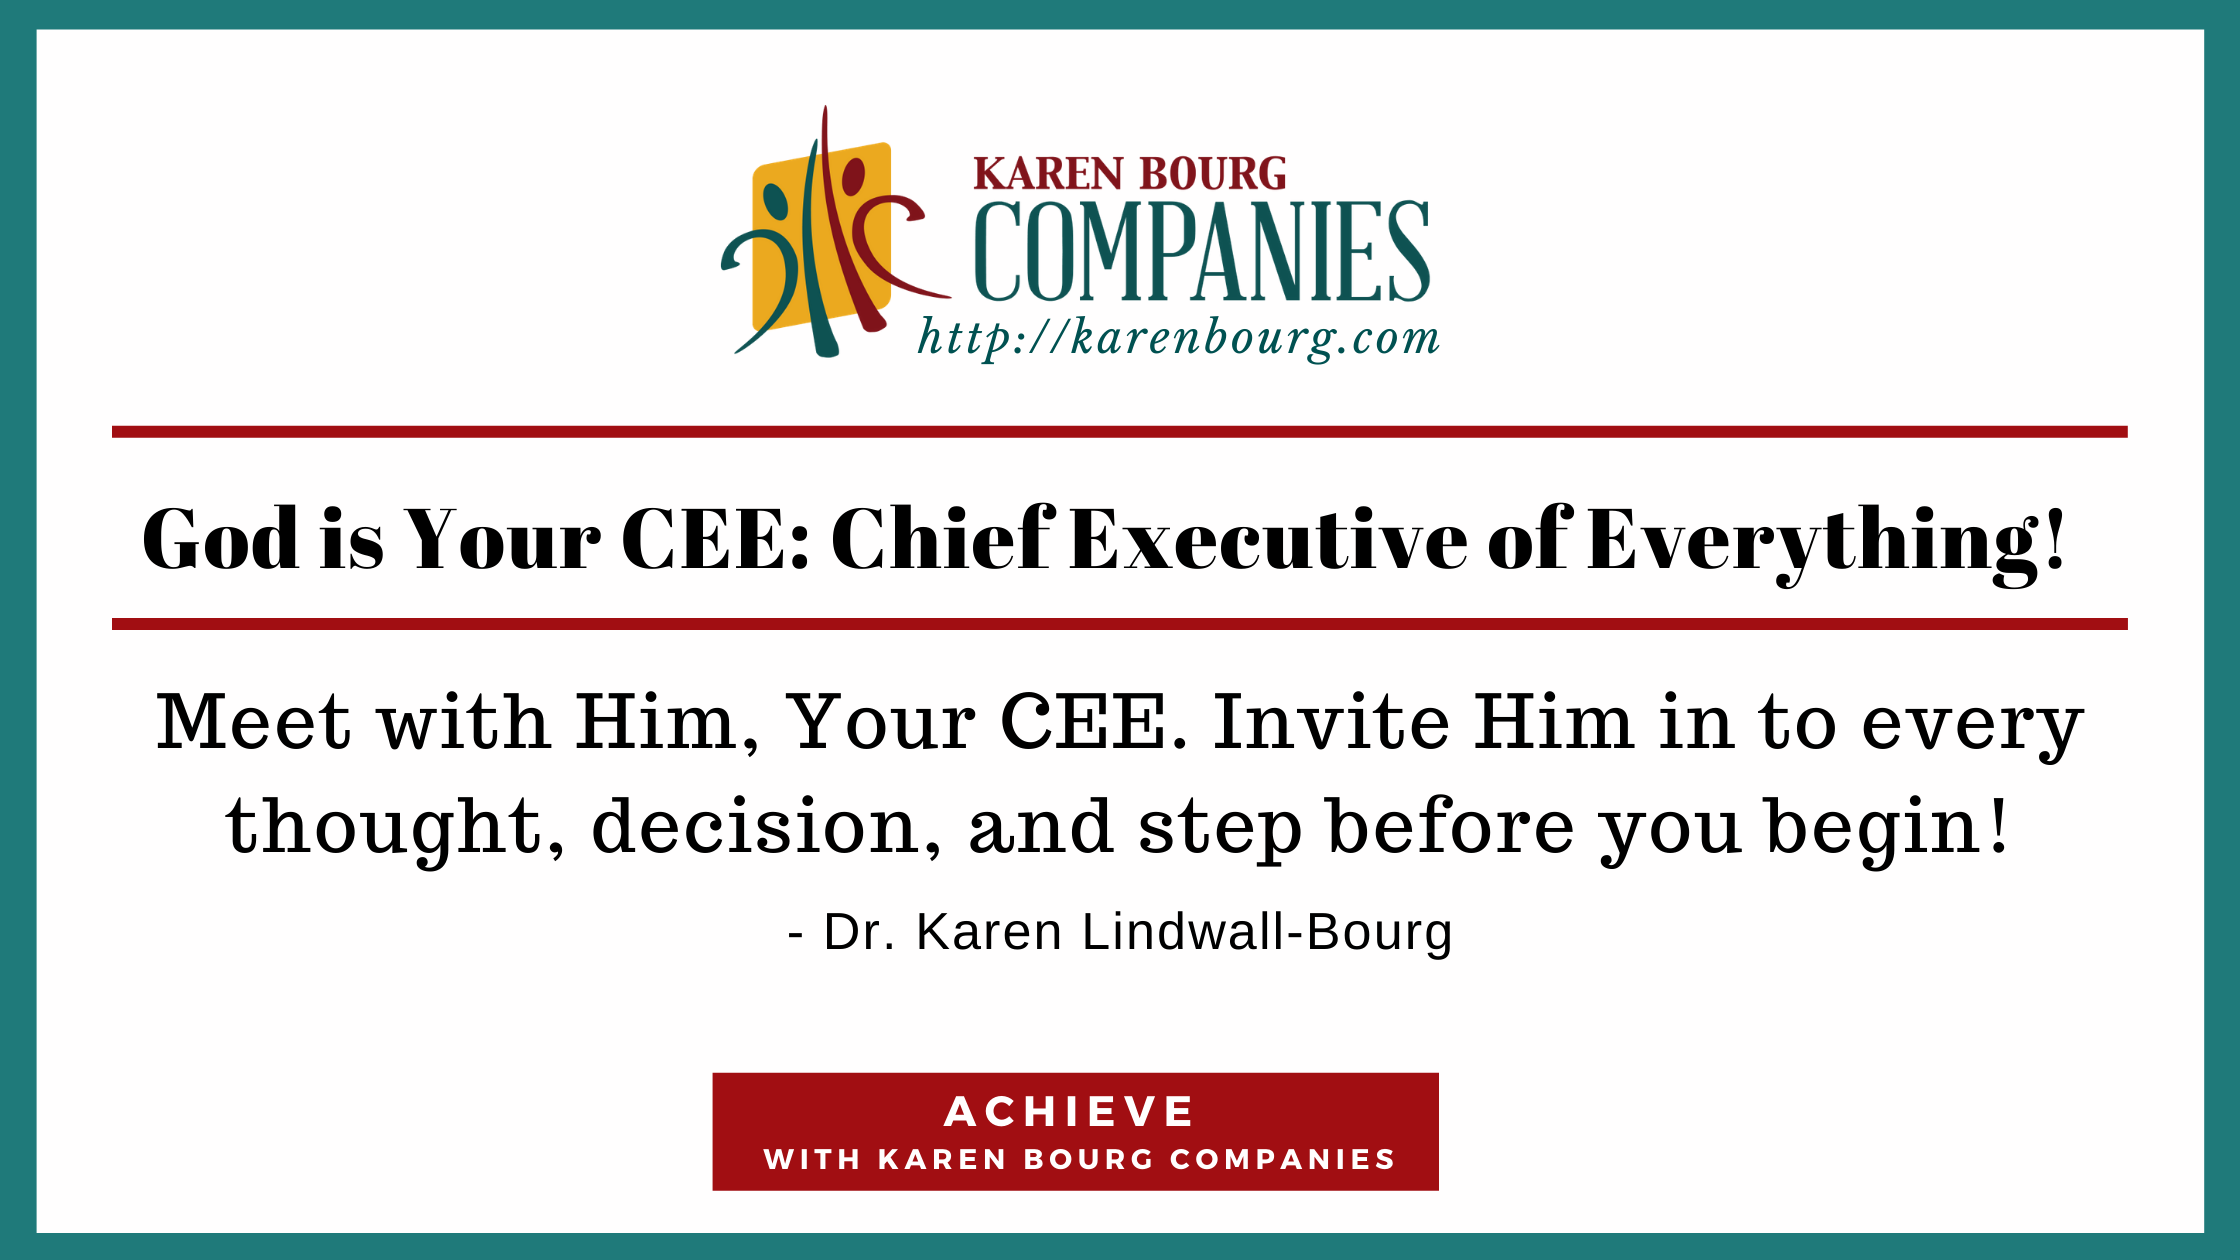 God is your CEE: Chief Executive of Everything!